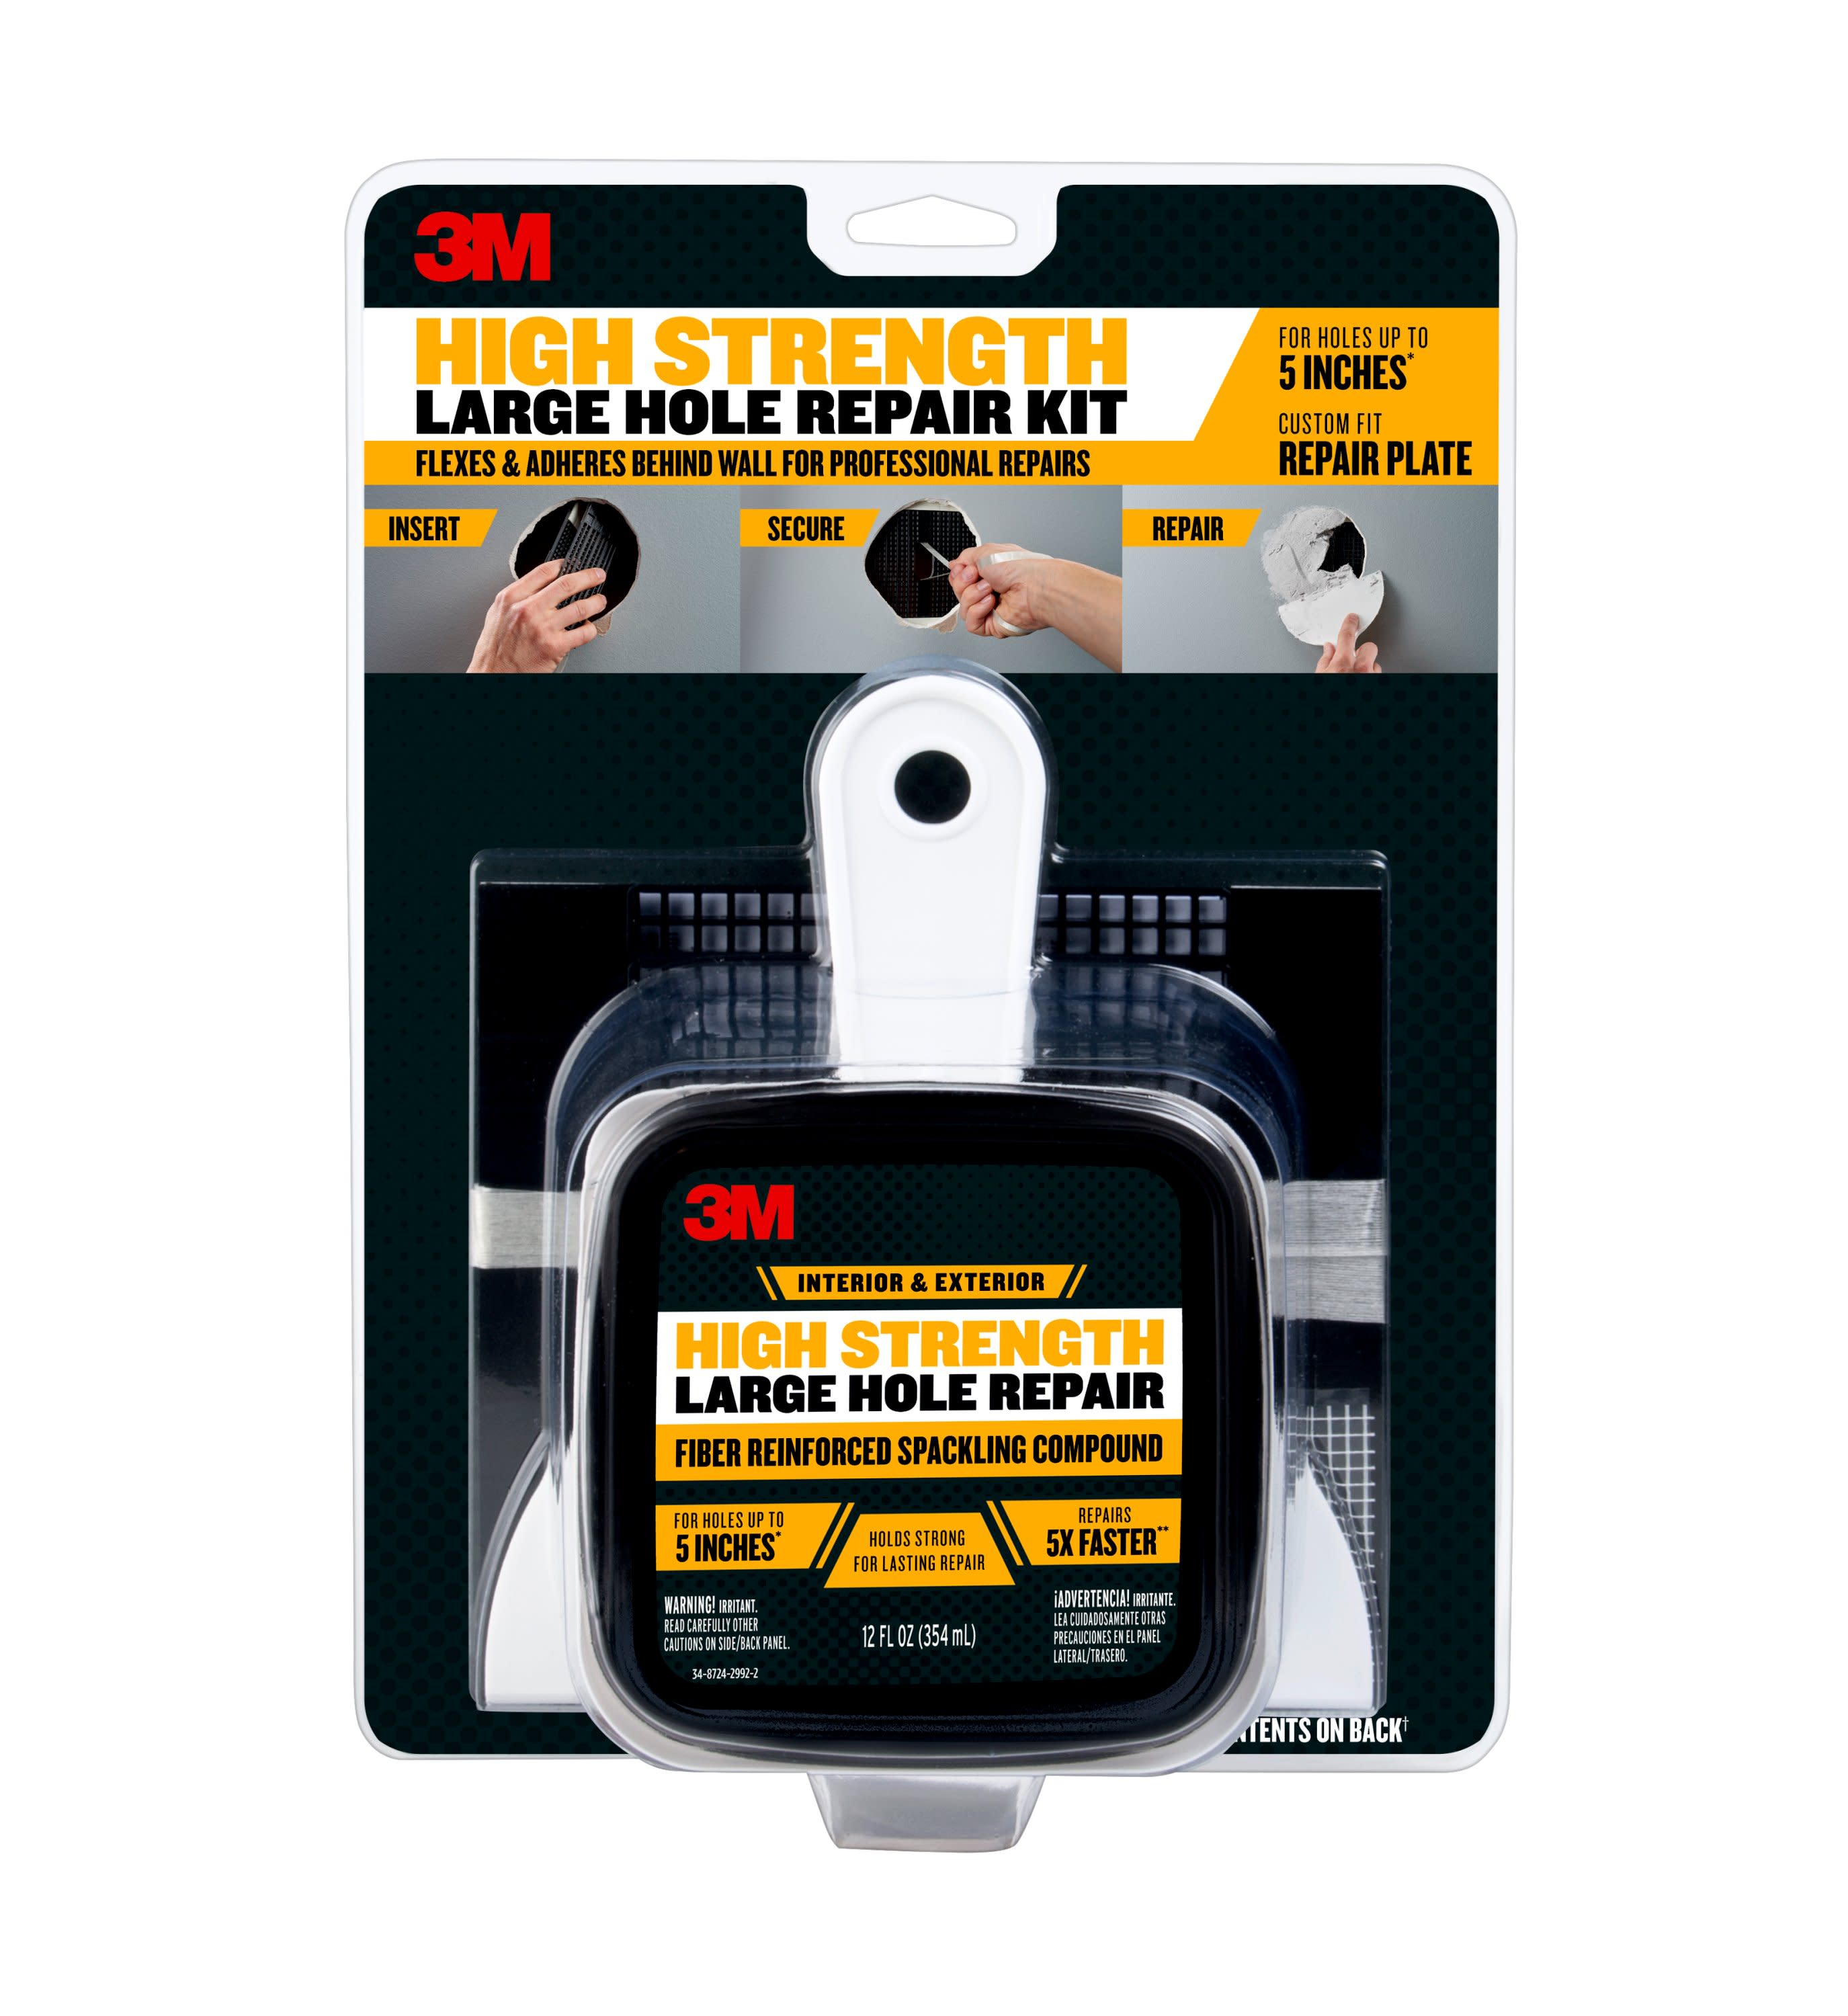 3m High Strength Large Hole Repair 12 Fl Oz Heavy Duty Interior Exterior White Patching Compound Kit In The Kling Department At Lowes Com